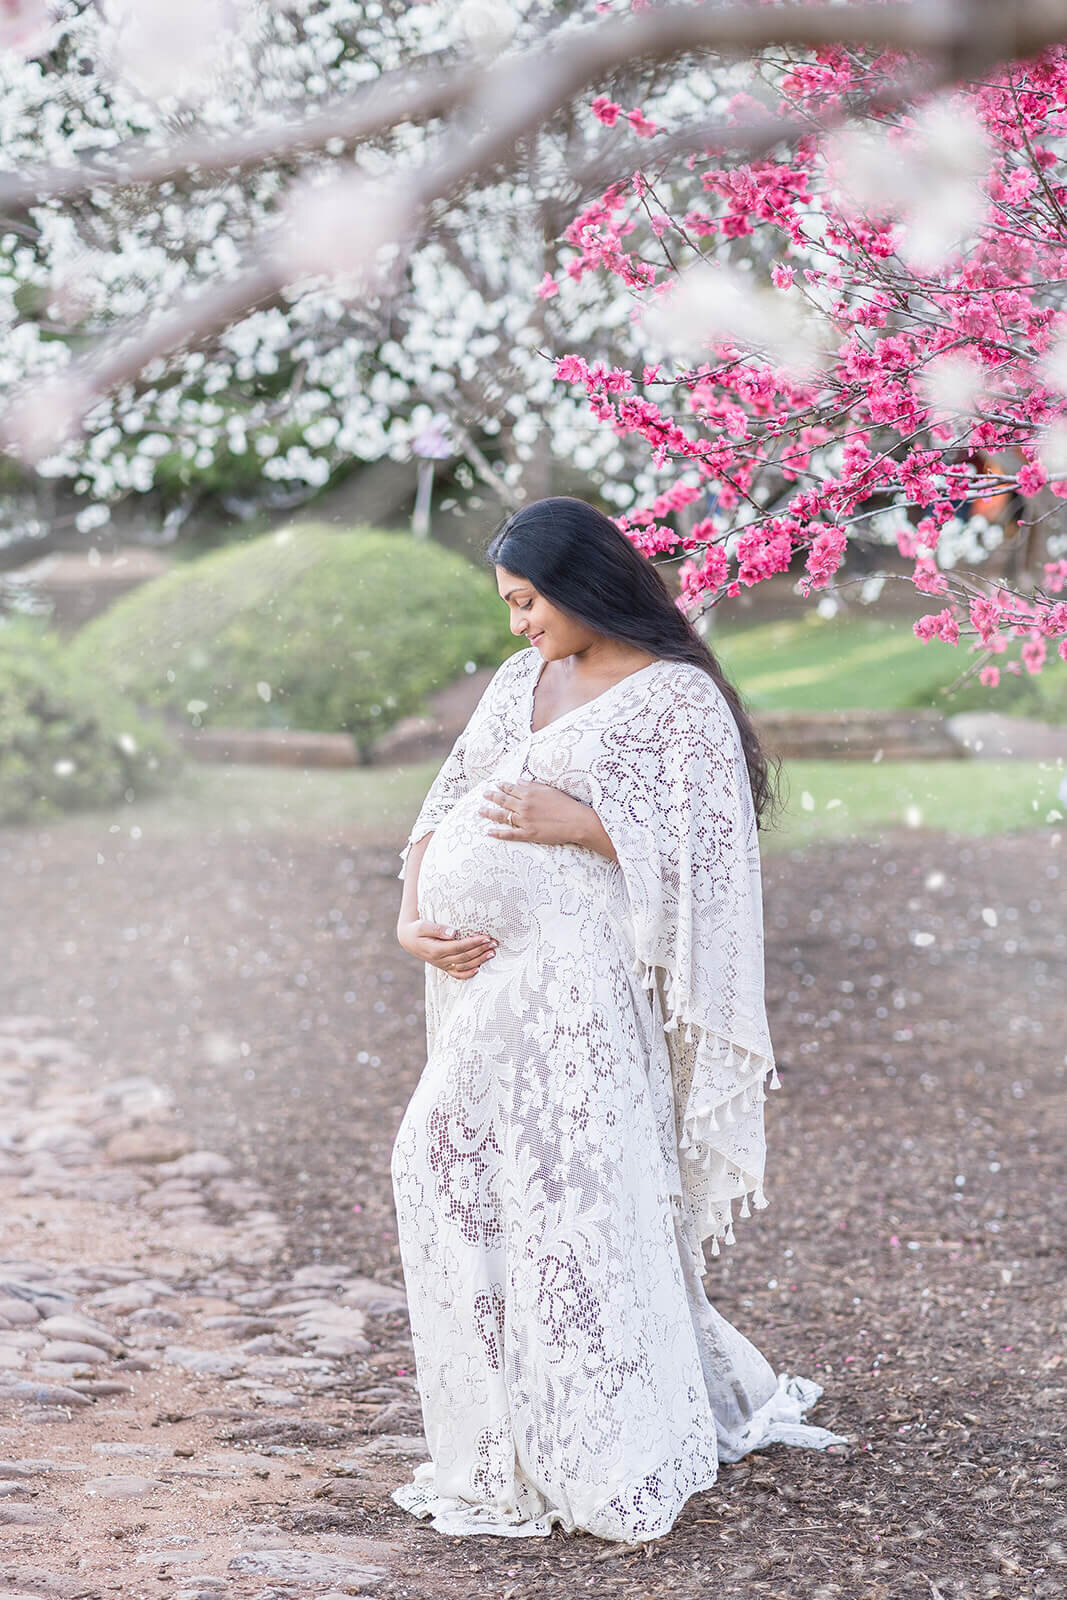 Celebrate impending motherhood with a mum adorned in 'We Are Reclamation' at Brisbane's Japanese garden, cherishing maternity bliss